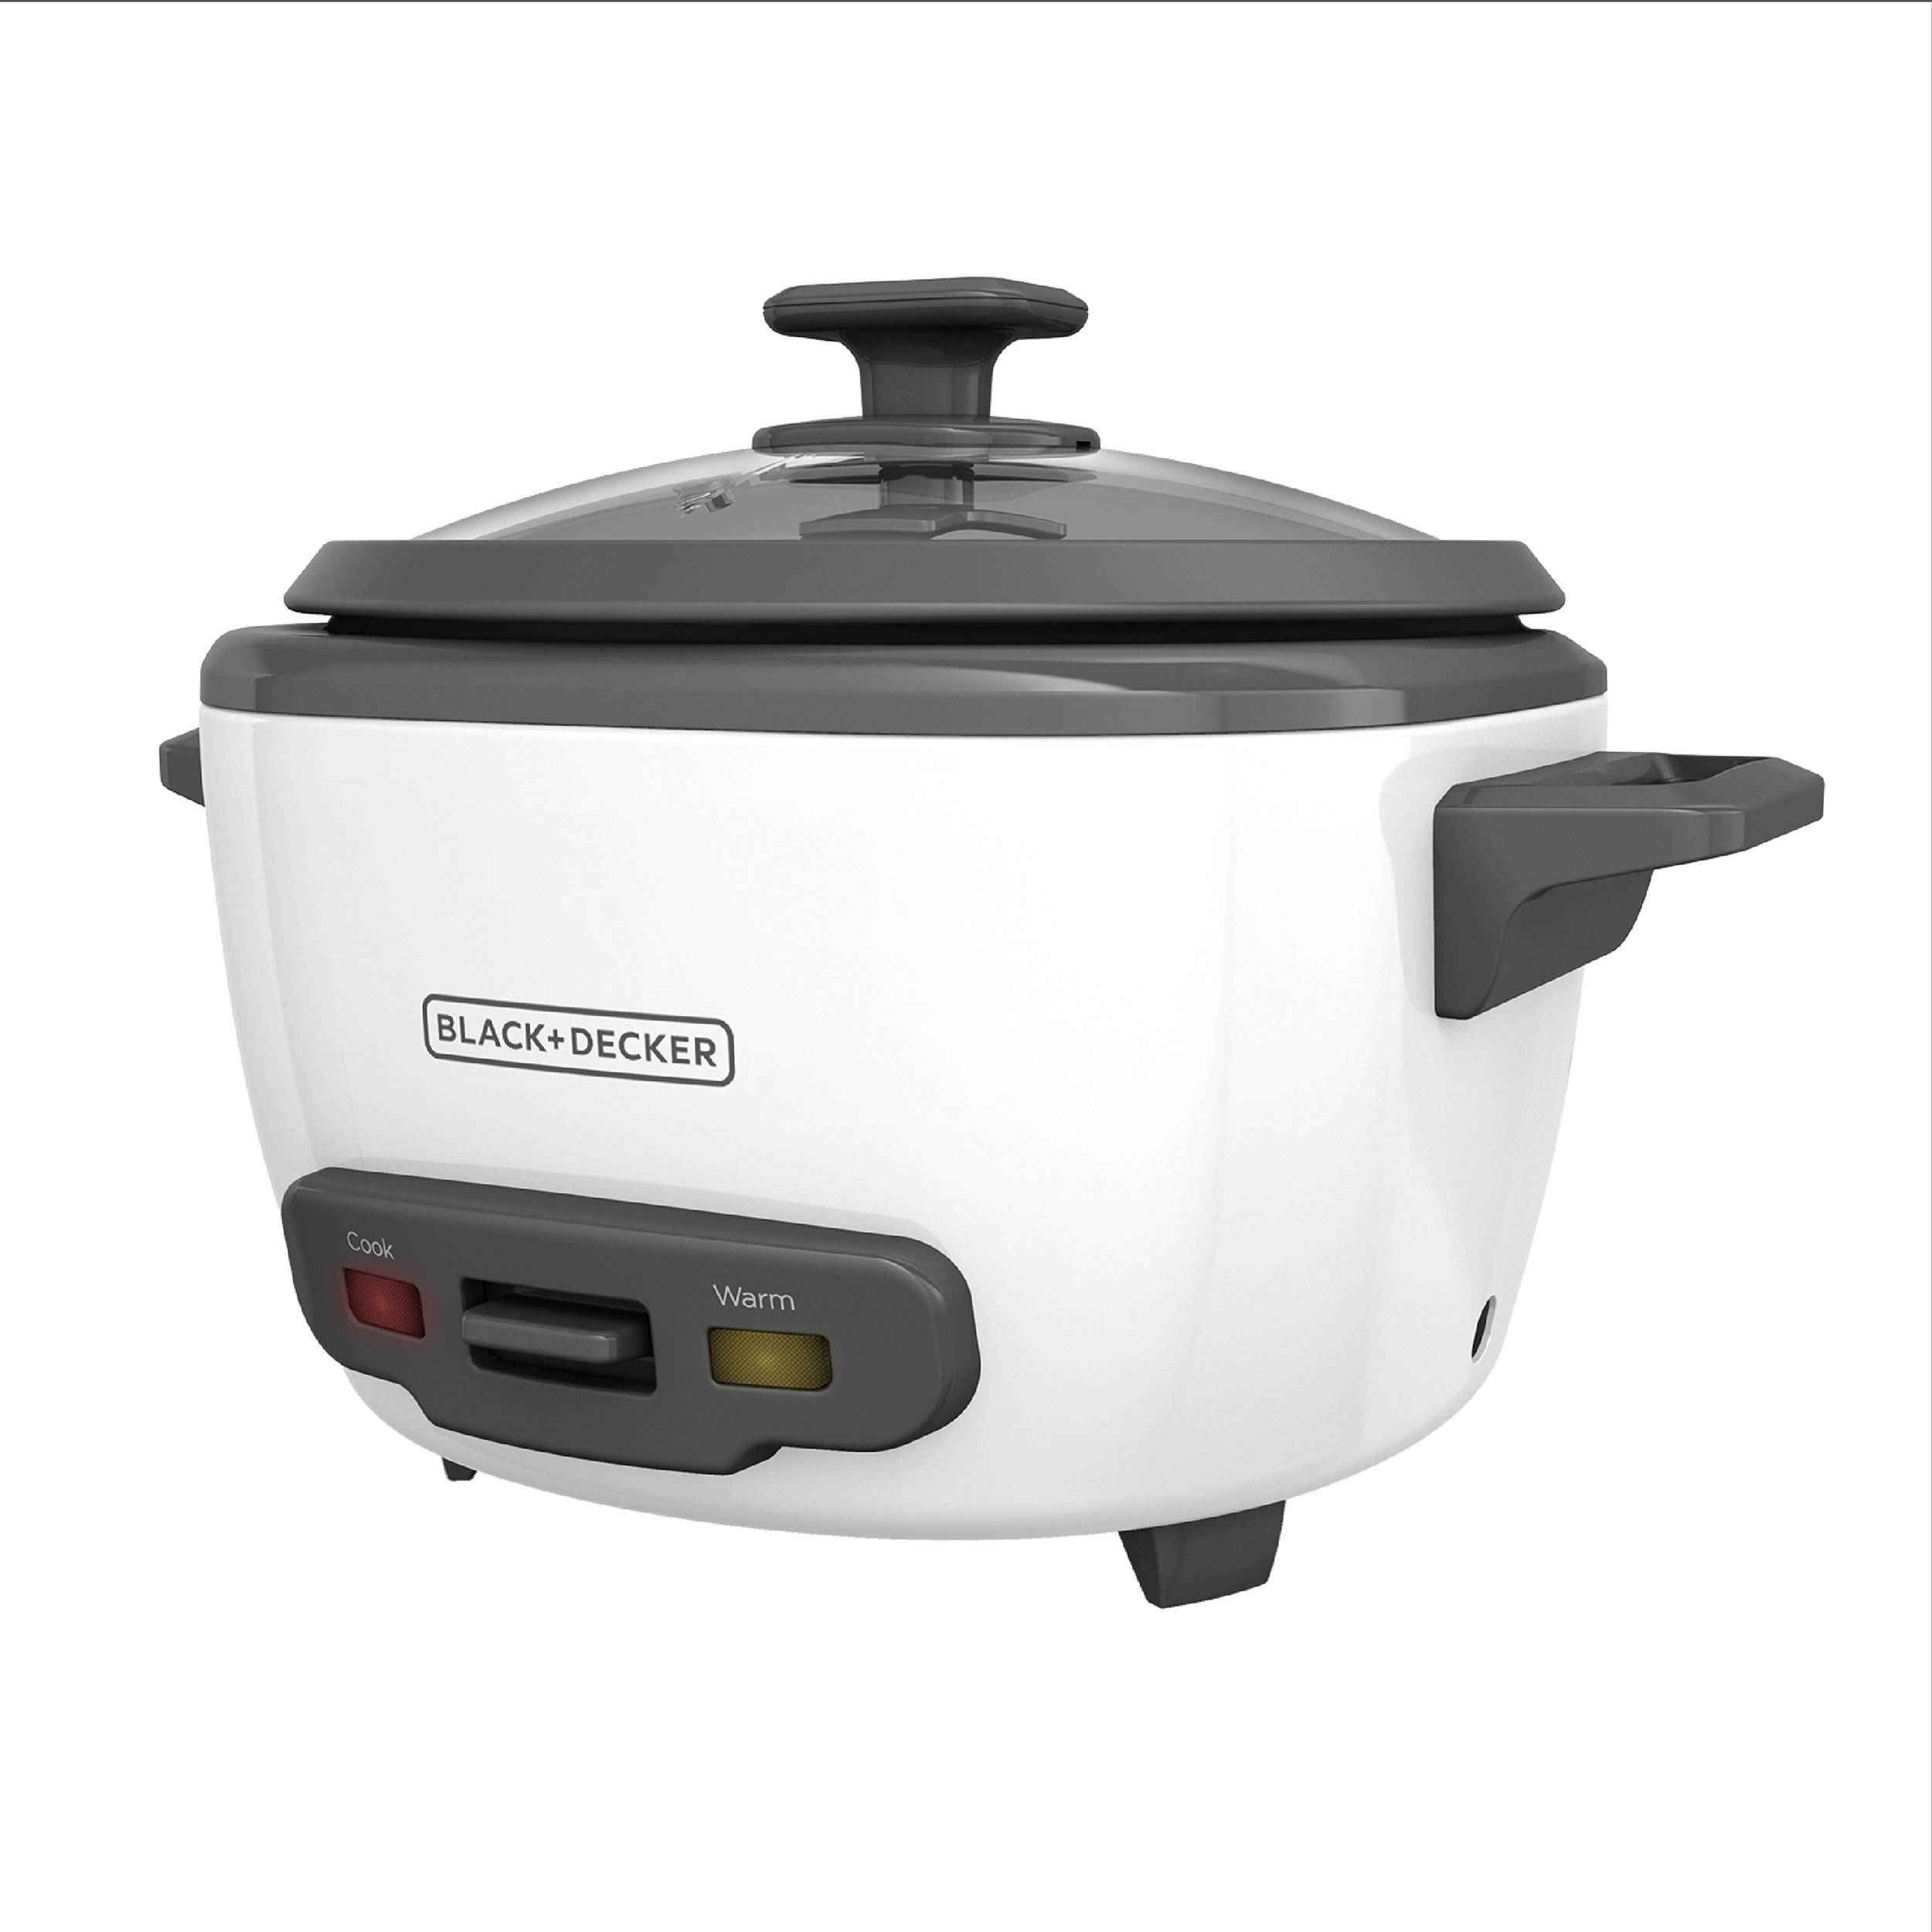 BLACK+DECKER 14-Cup Programmable Residential Rice Cooker at